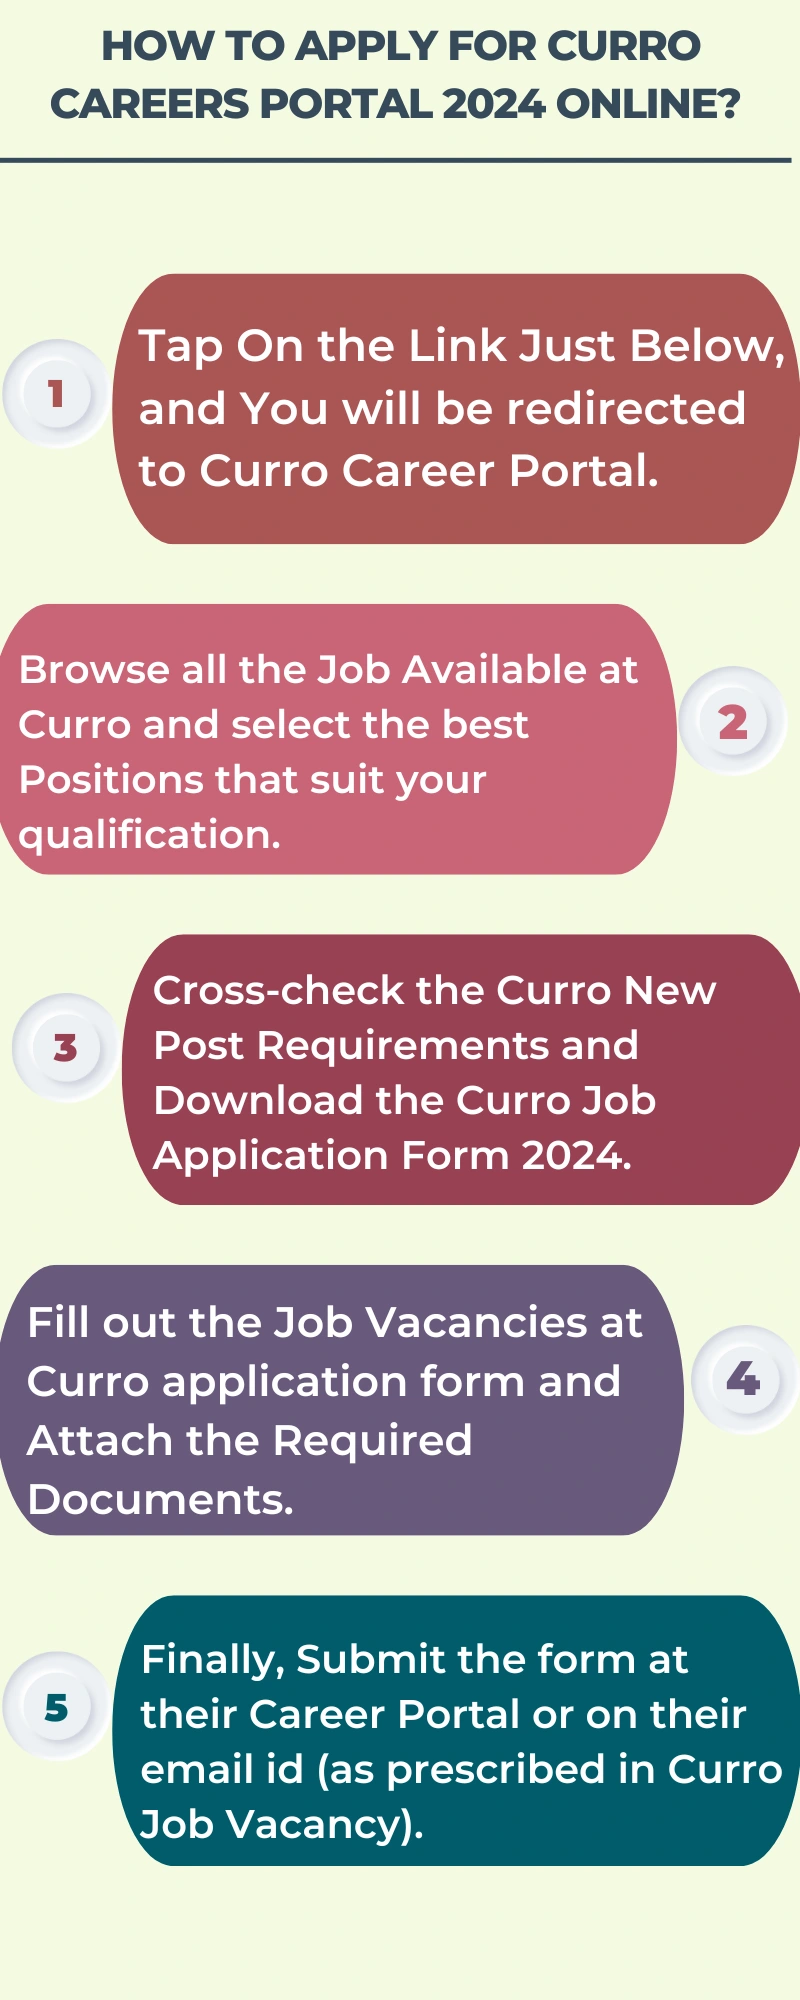  How To Apply for Curro Careers Portal 2024 Online?